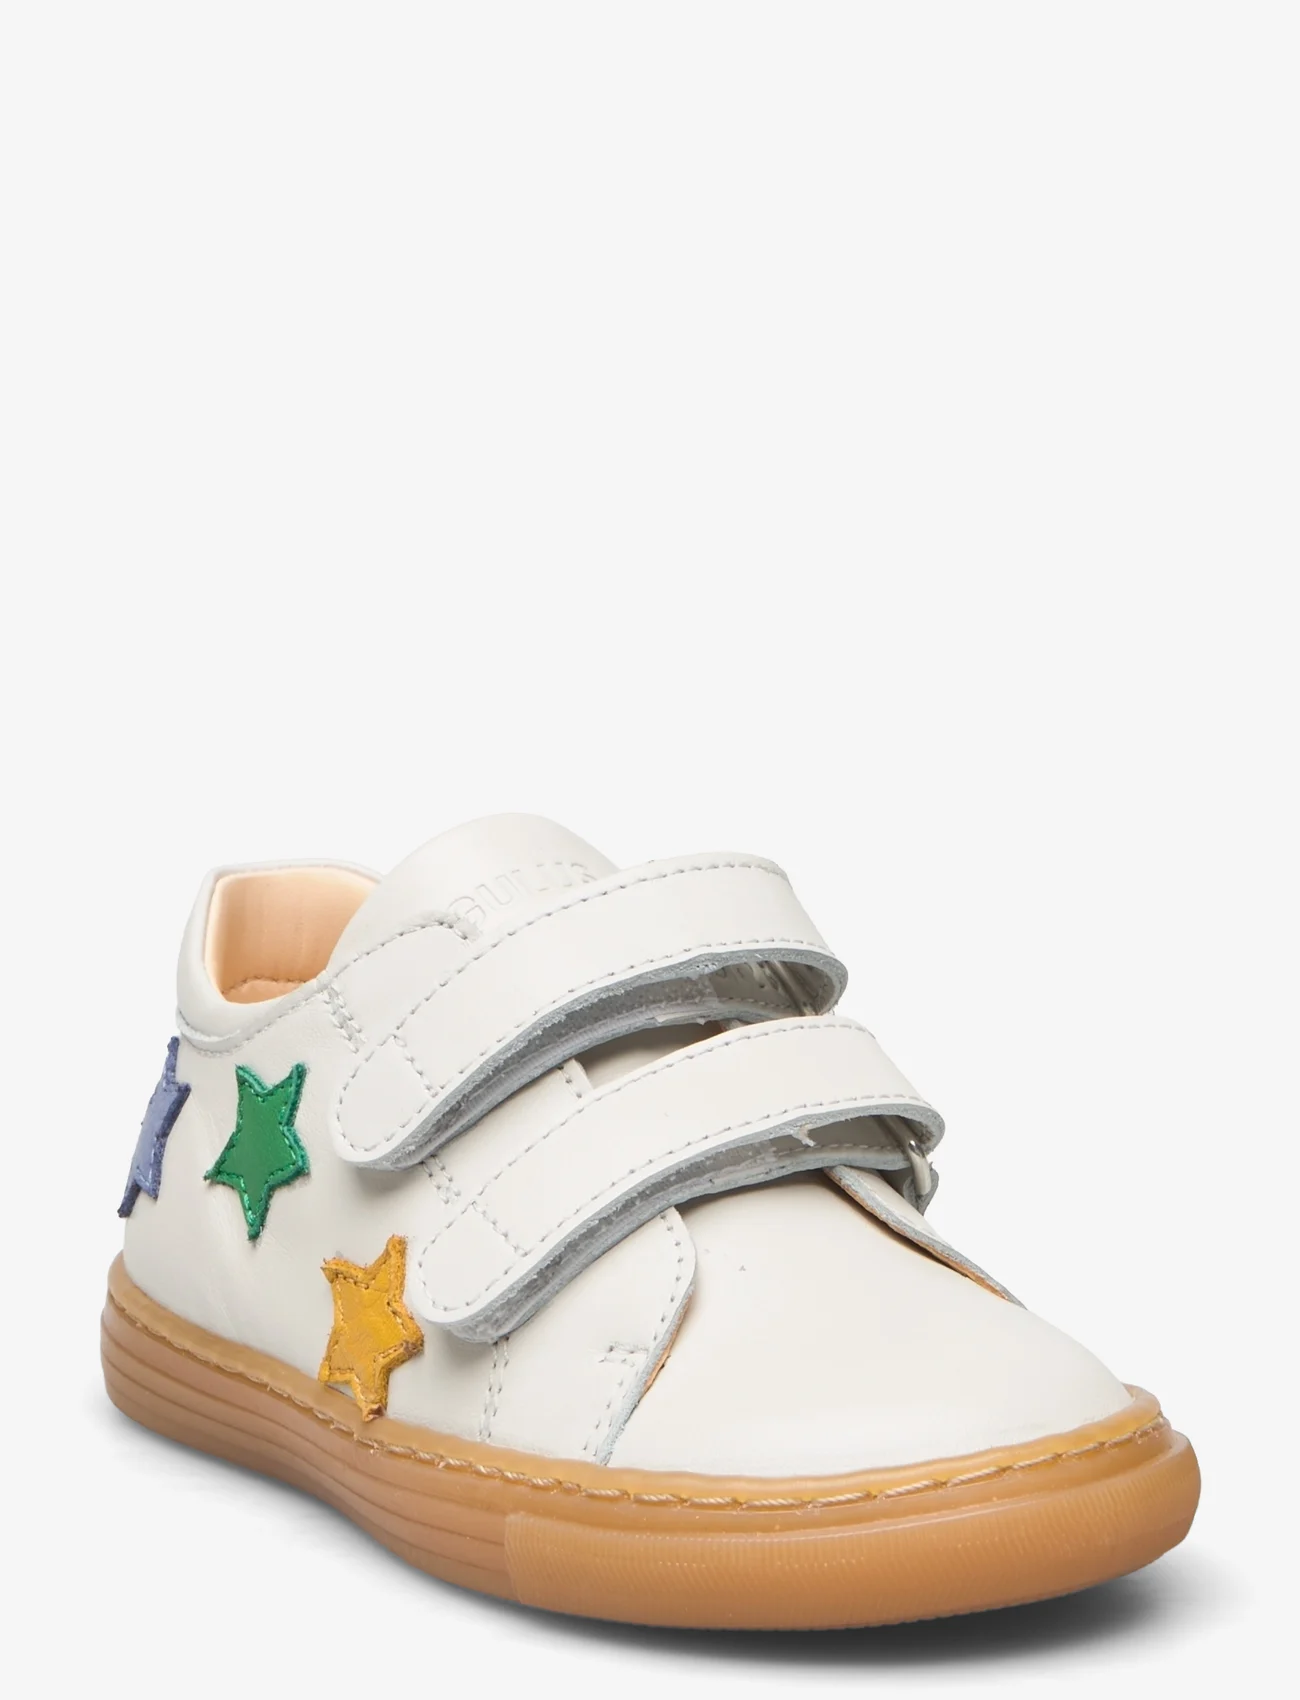 ANGULUS - Shoes - flat - with velcro - zomerkoopjes - 1493/a005 off white/stars - 0